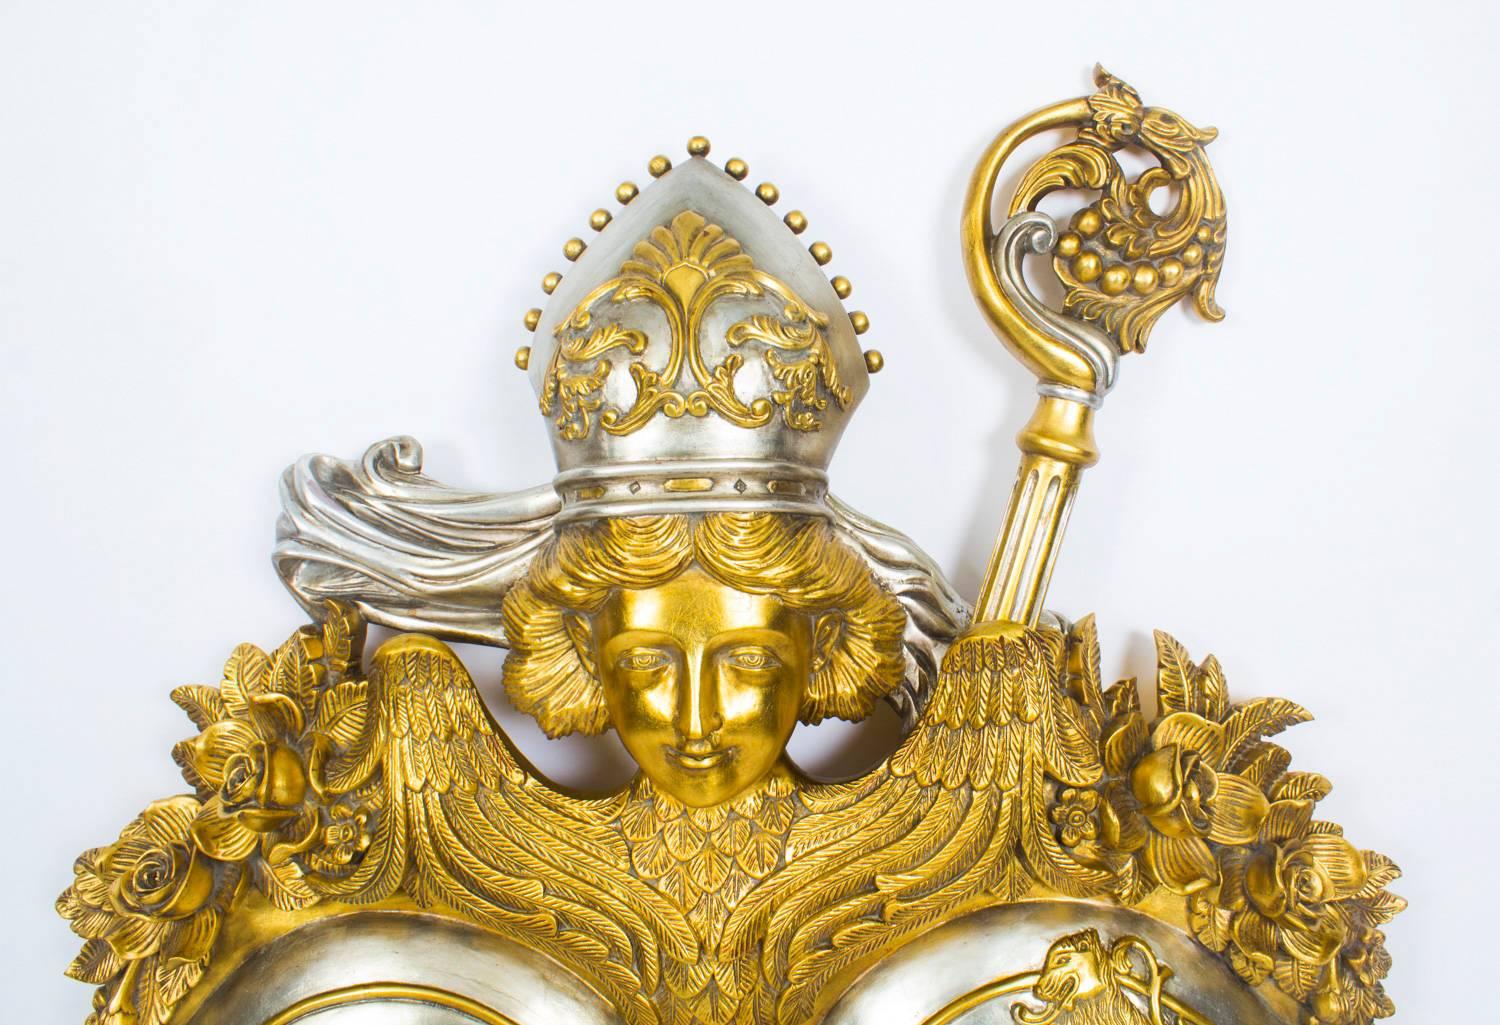 A highly decorative large gilded carved mahogany antique Habsburg heraldic coat of arms, late 20th century in date.

This stunning coat of arms consists of a gilded Papal Tiara on a winged angel and Crozier, to the top, with a pair of shields below,